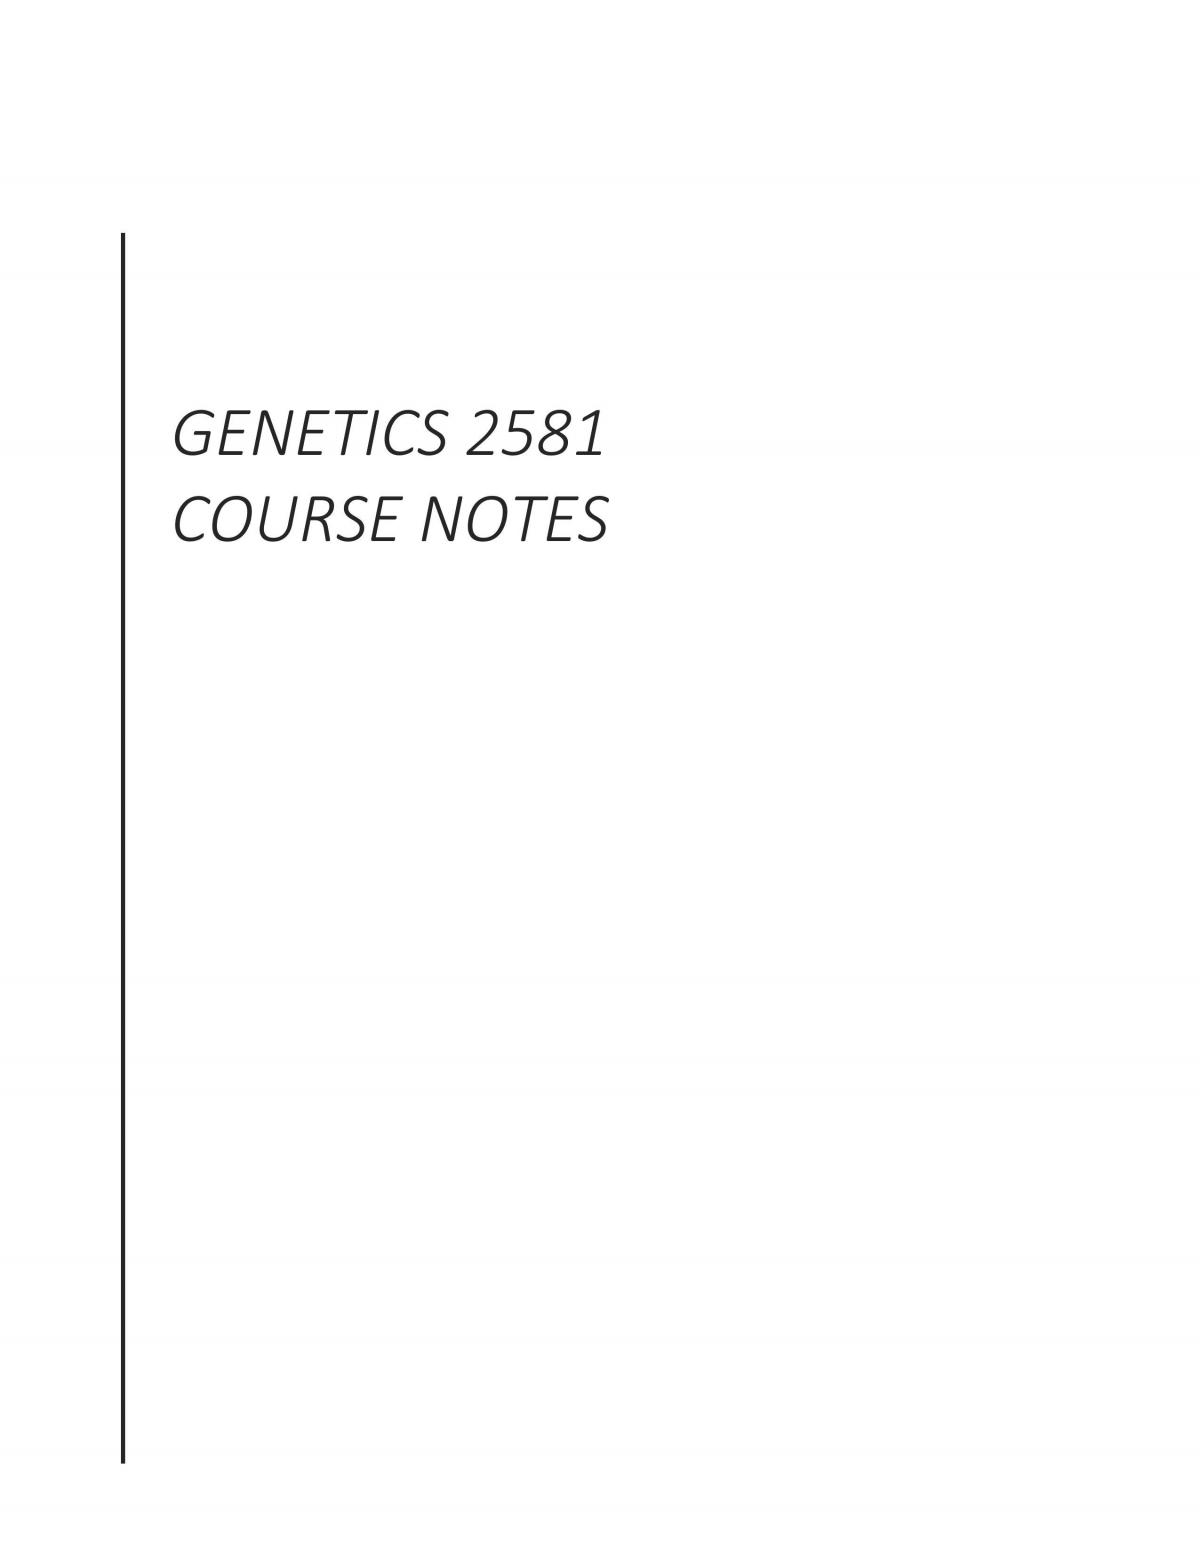 Complete Biology (Genetics) 2581 Notes - Page 1